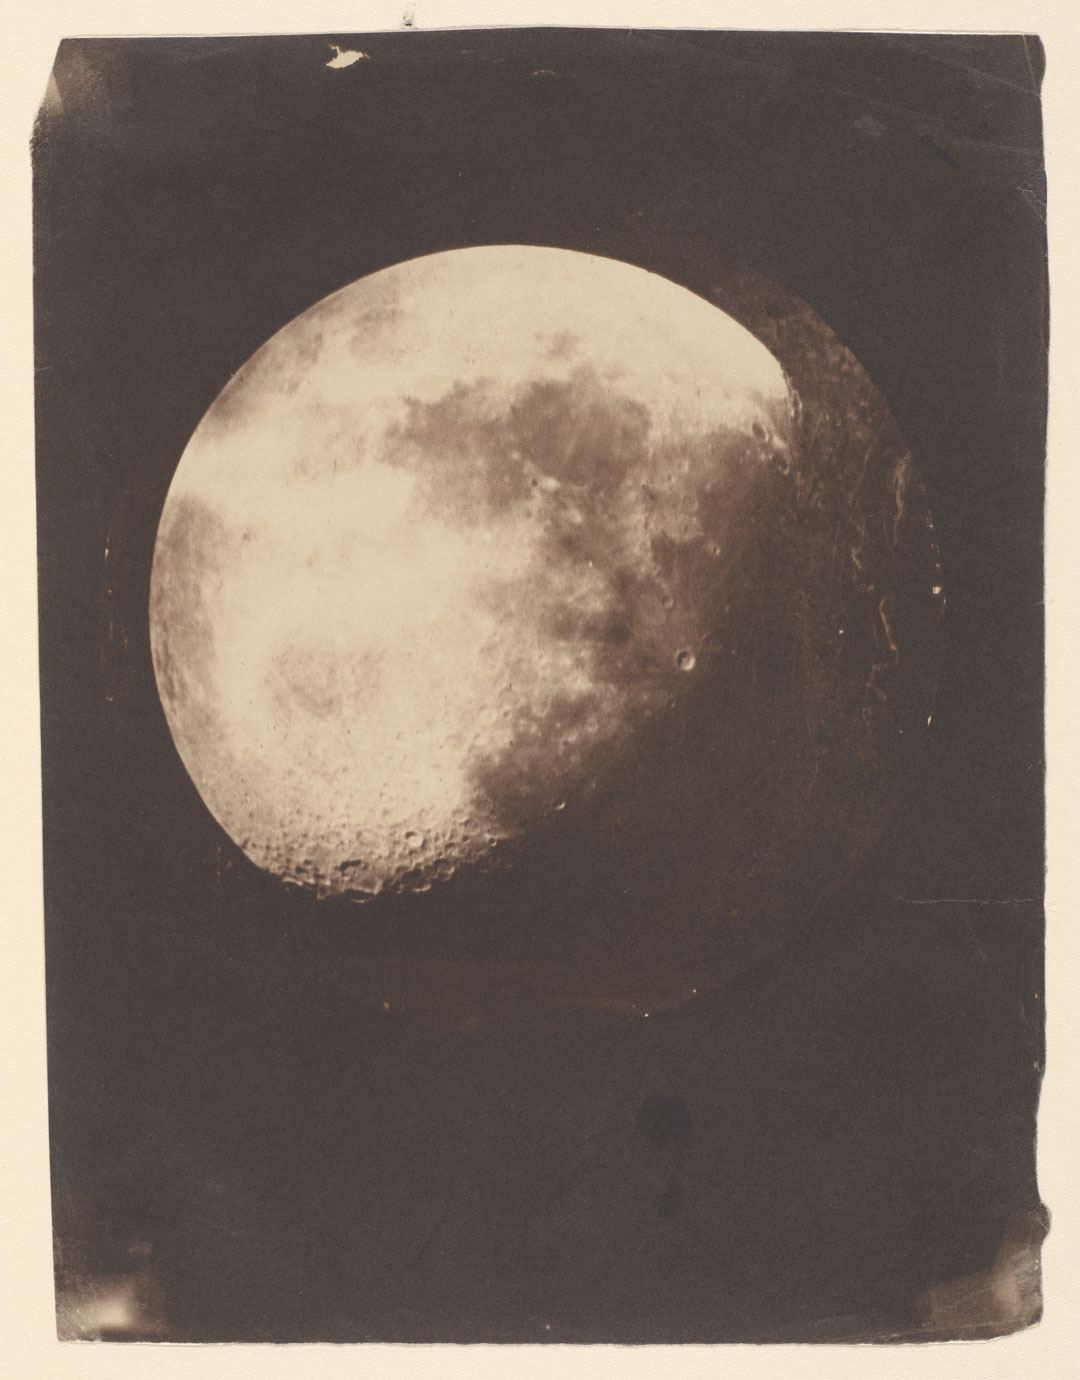 John Adams Whipple and James Black, The Moon, 1857–60, salted paper print made from a glass negative, 21.1 × 15.8 cm (8¼ × 6¼ in), copy of a daguerreotype made 193 at Harvard College Observatory, Cambridge, Massachusetts, Metropolitan Museum of Art, New York. Public domain. As reproduced in Sun and Moon